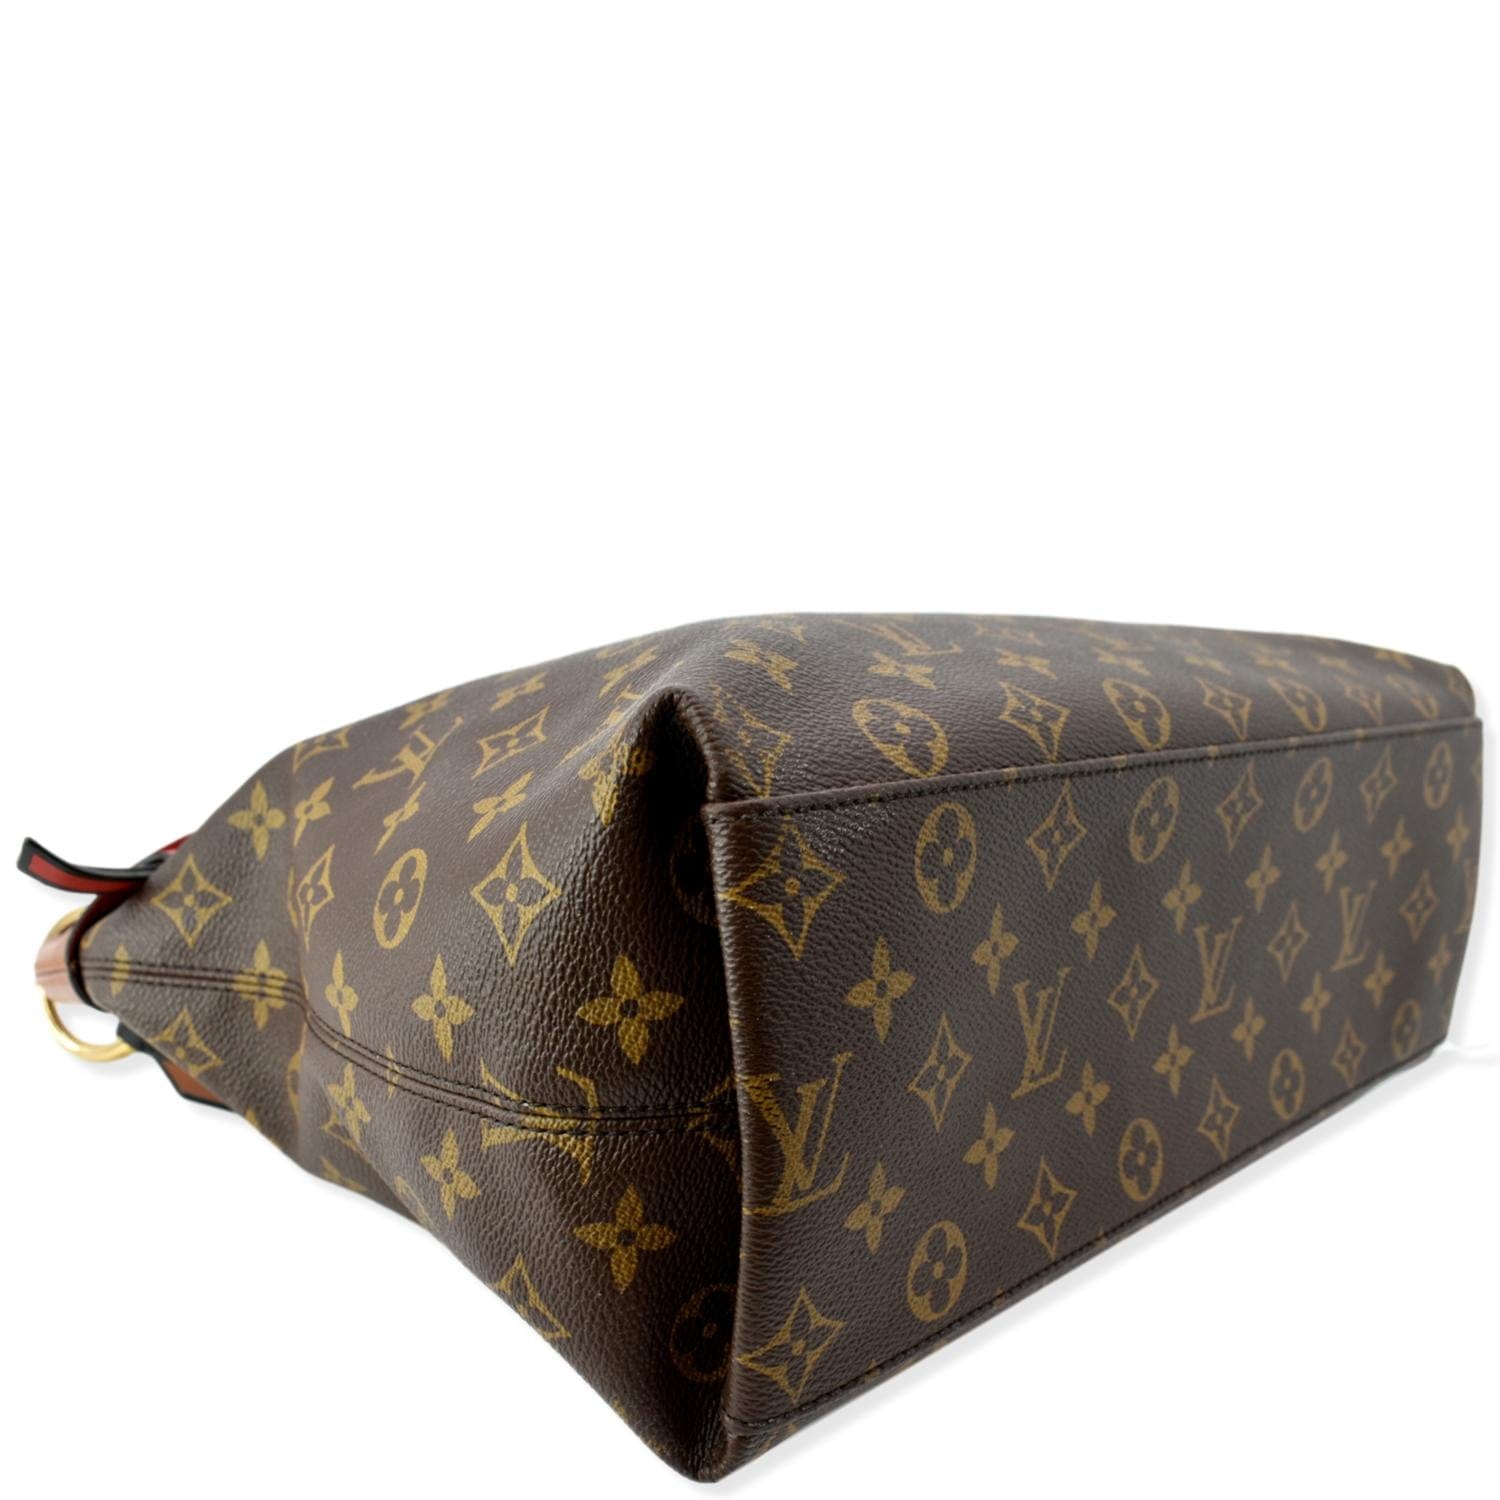 Louis Vuitton Tuileries Hobo Sholder Bag Authenticated By Lxr